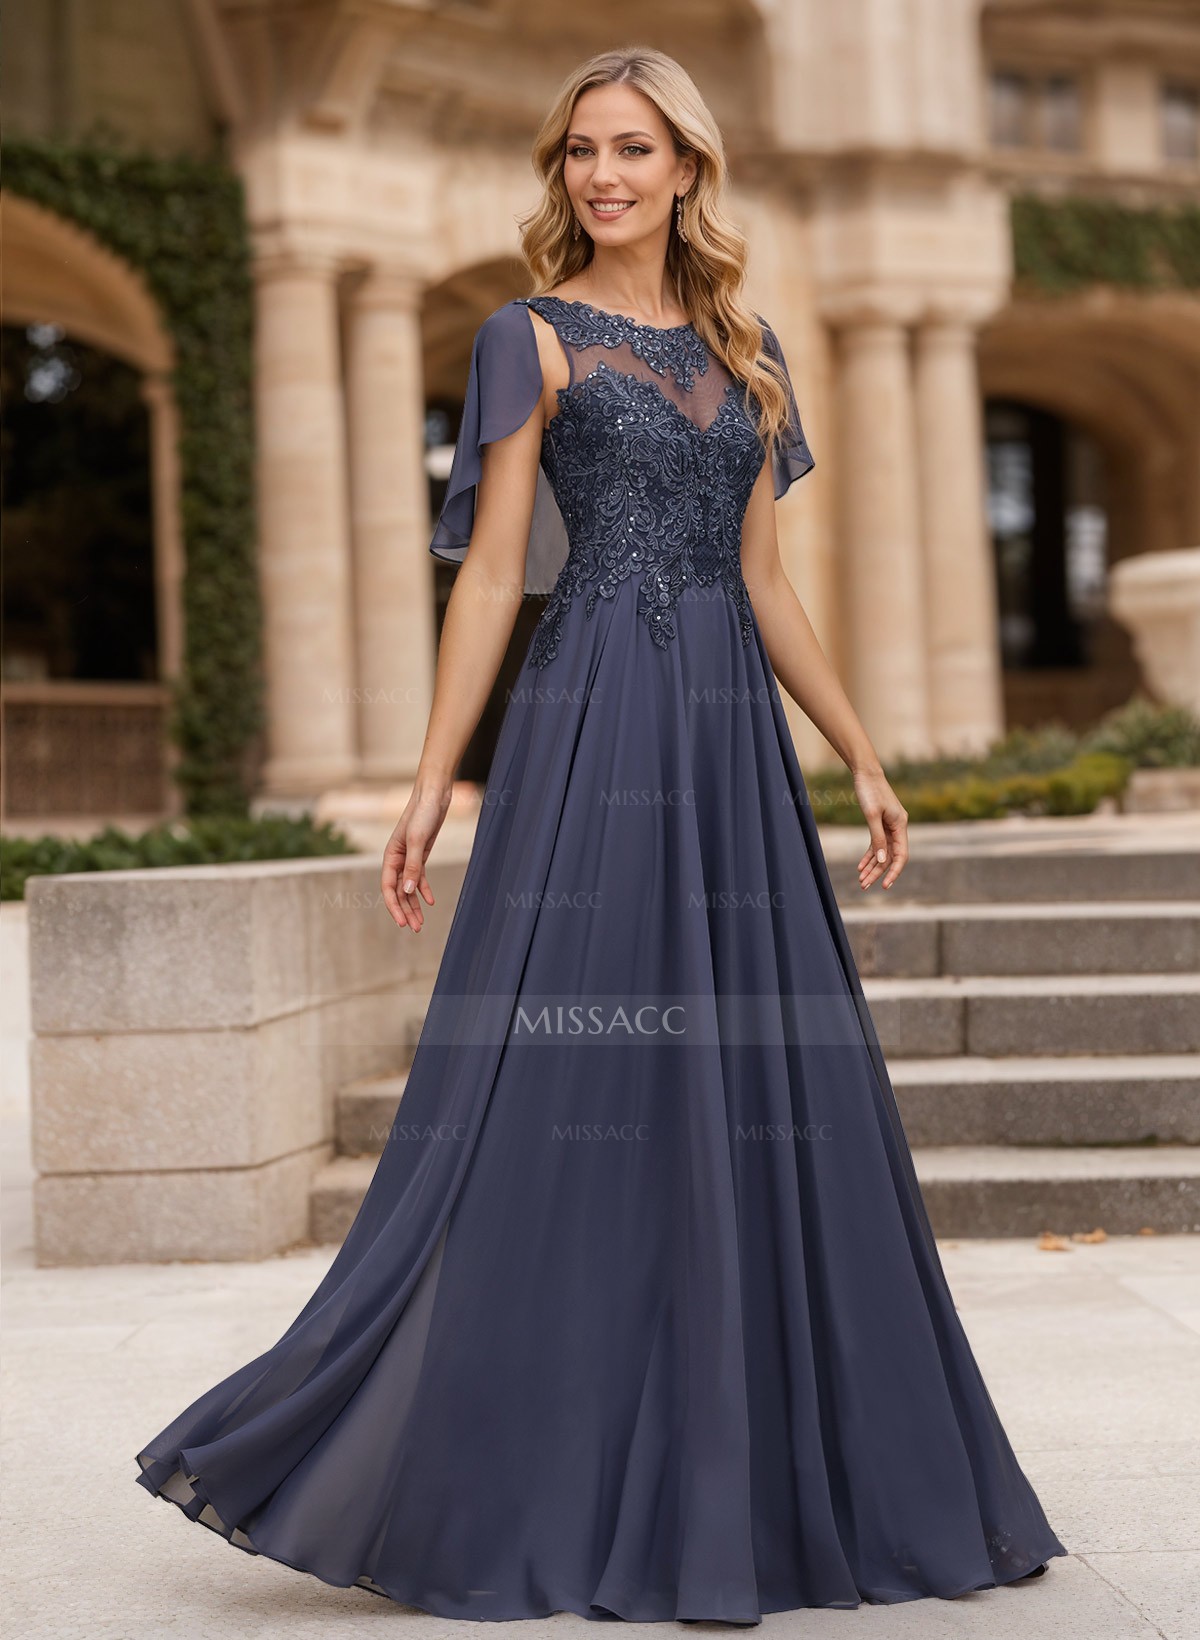 A-Line Scoop Neck Sleeveless Chiffon Mother Of The Bride Dresses With Lace